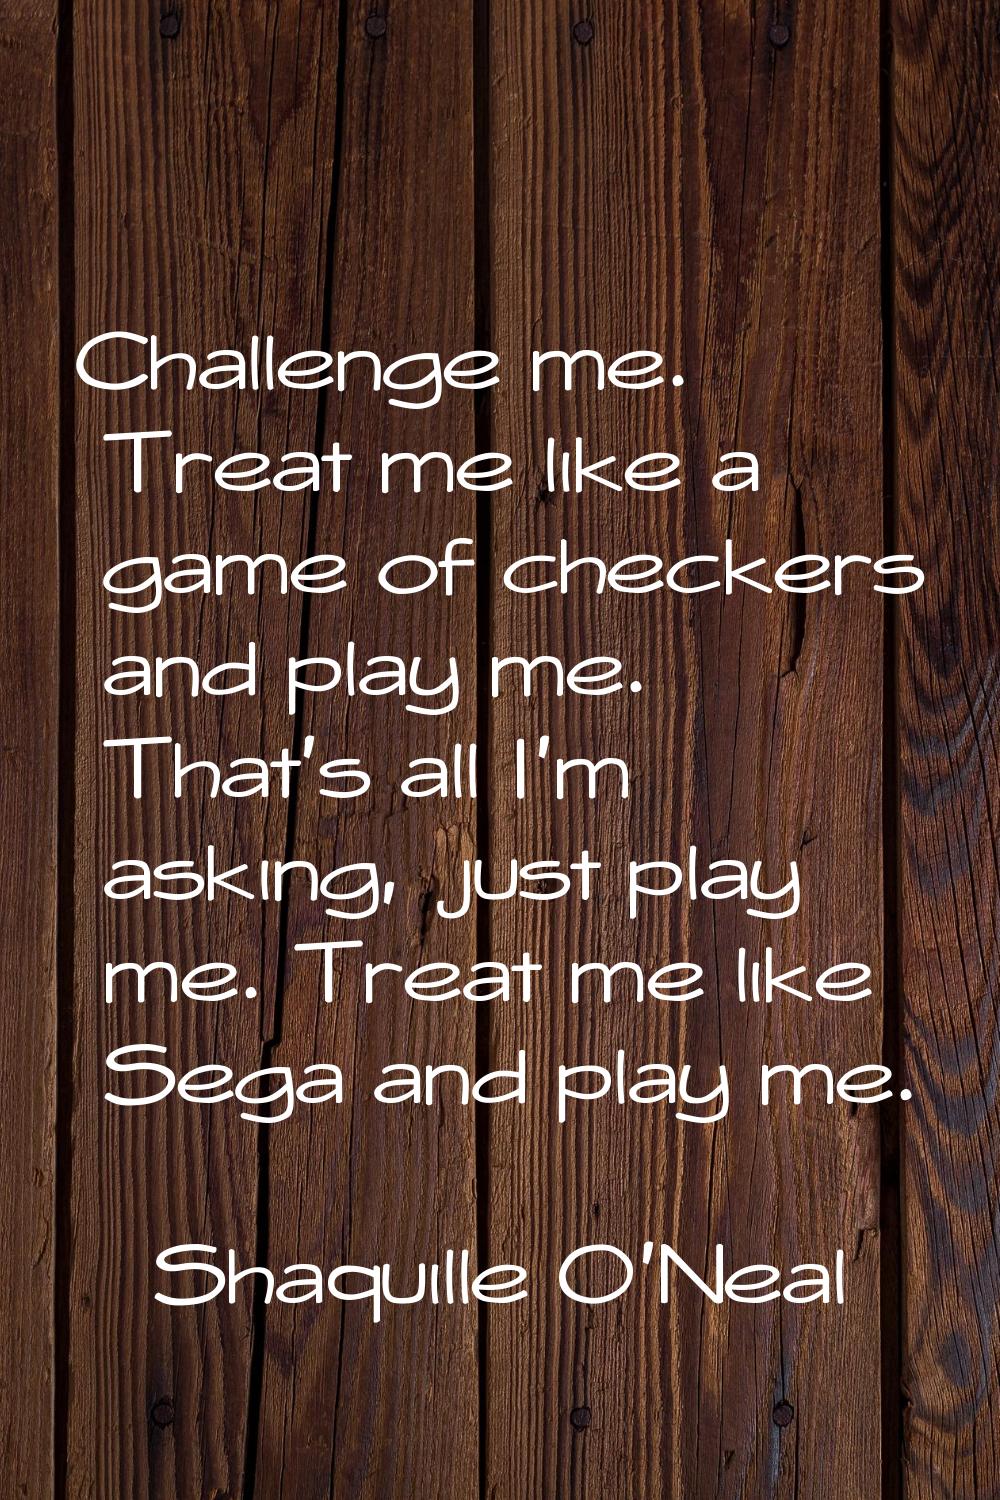 Challenge me. Treat me like a game of checkers and play me. That's all I'm asking, just play me. Tr